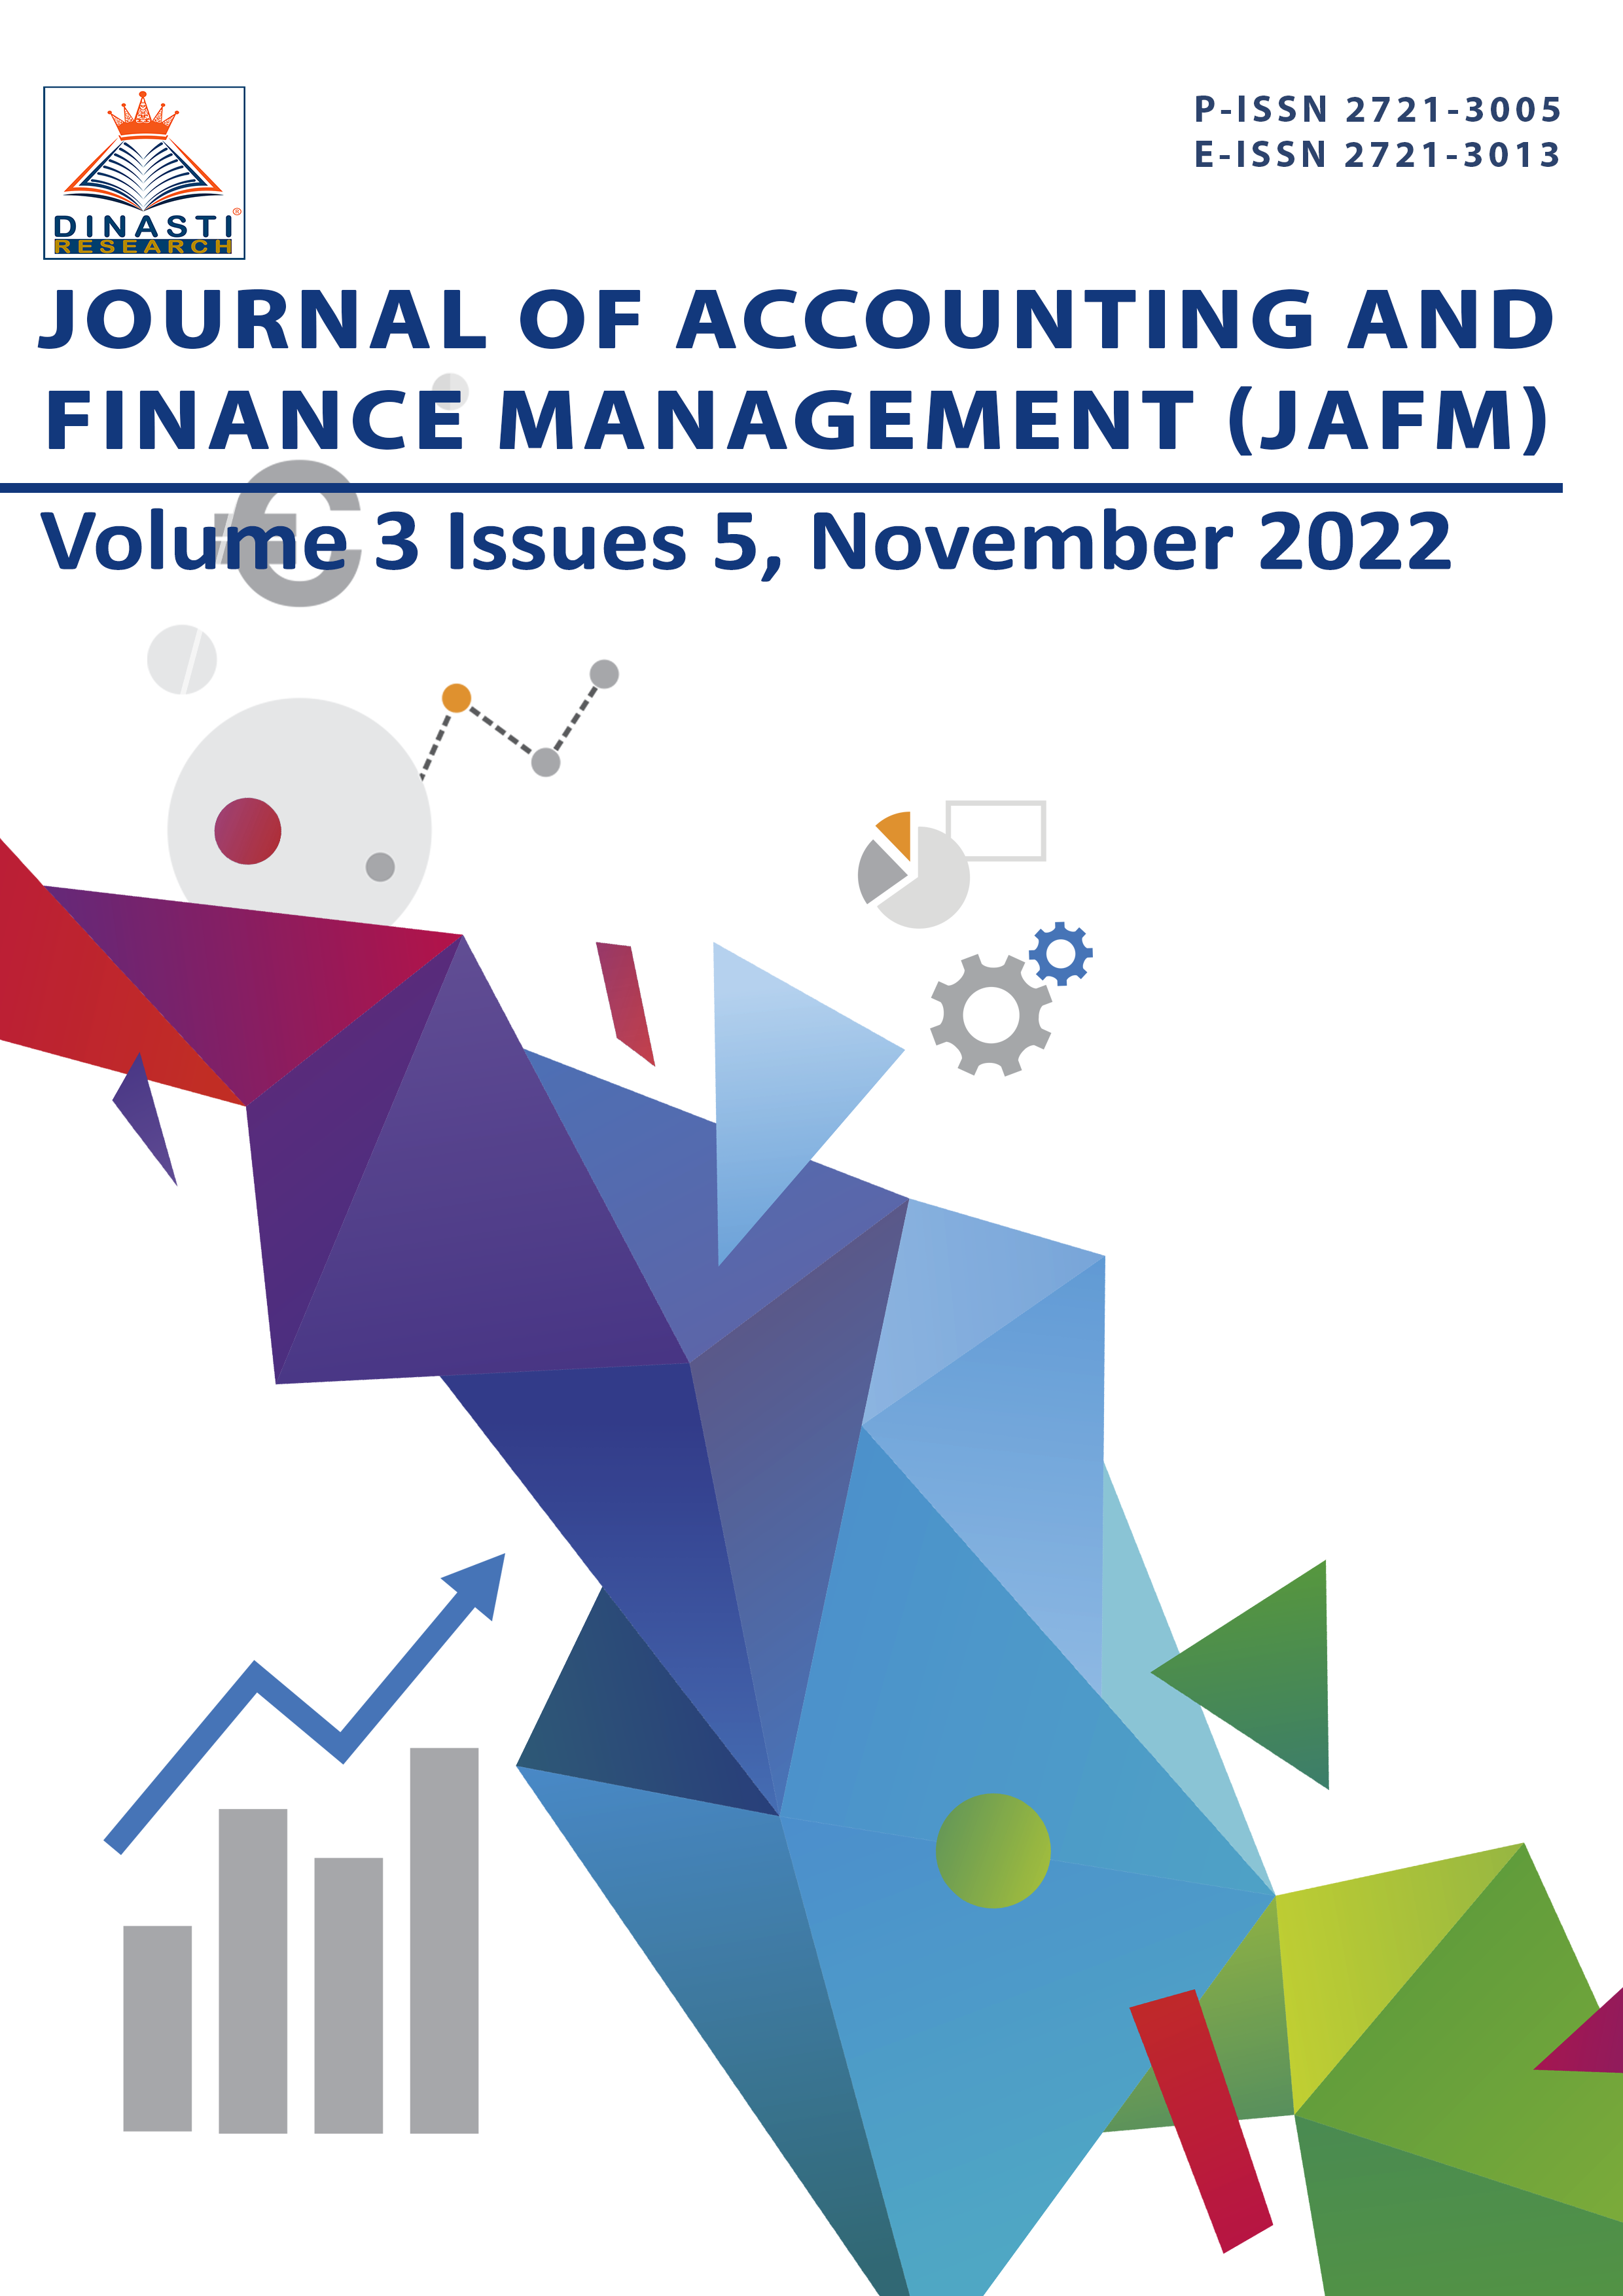 					View Vol. 3 No. 5 (2022): Journal of Accounting and Finance Management (November-December 2022)
				